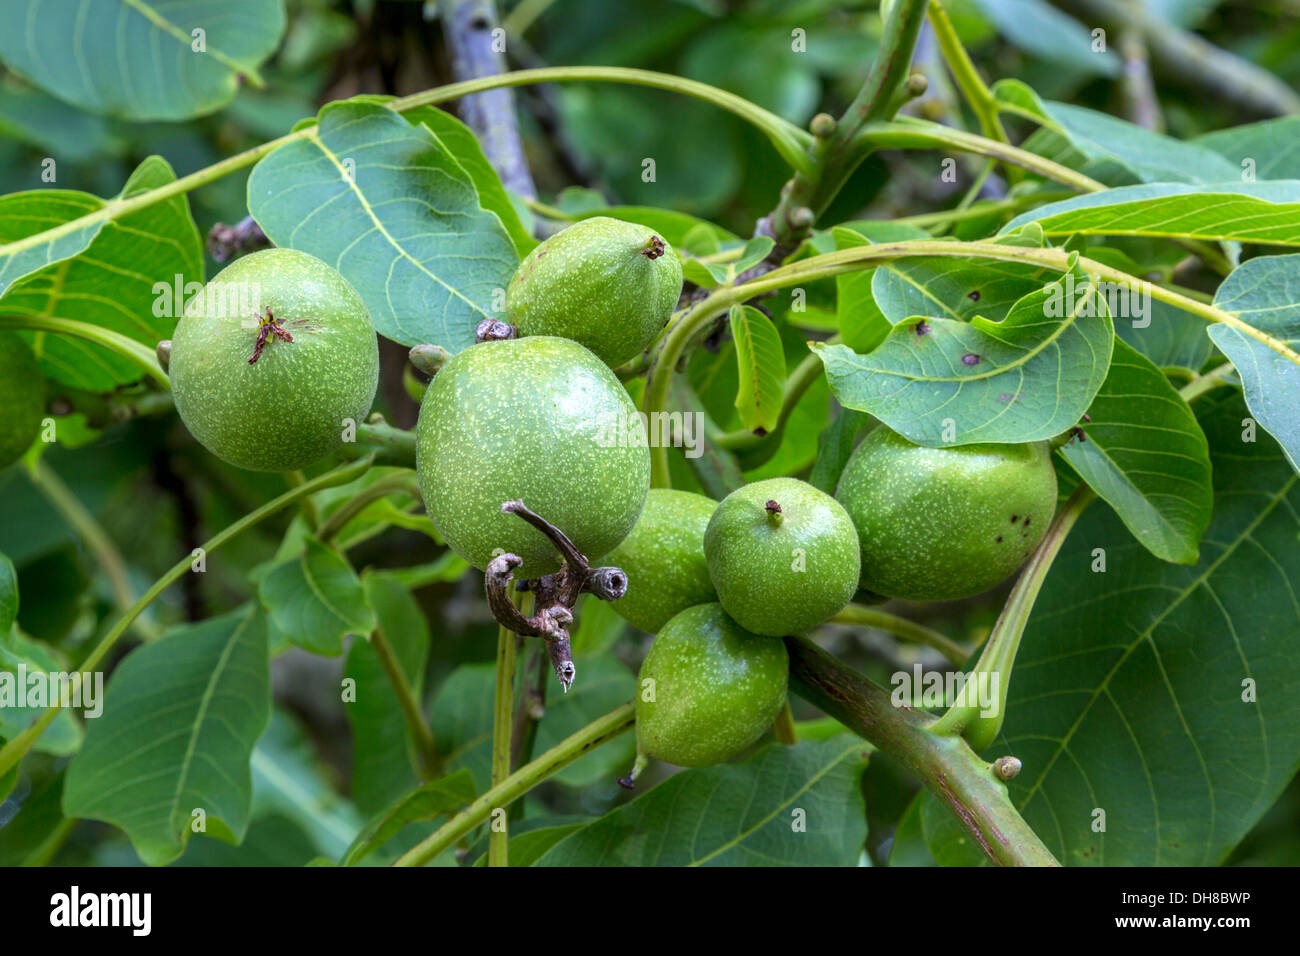 The English walnut tree and fruit, Juglans regia, found here in a Sussex, graveyard, UK. Stock Photo